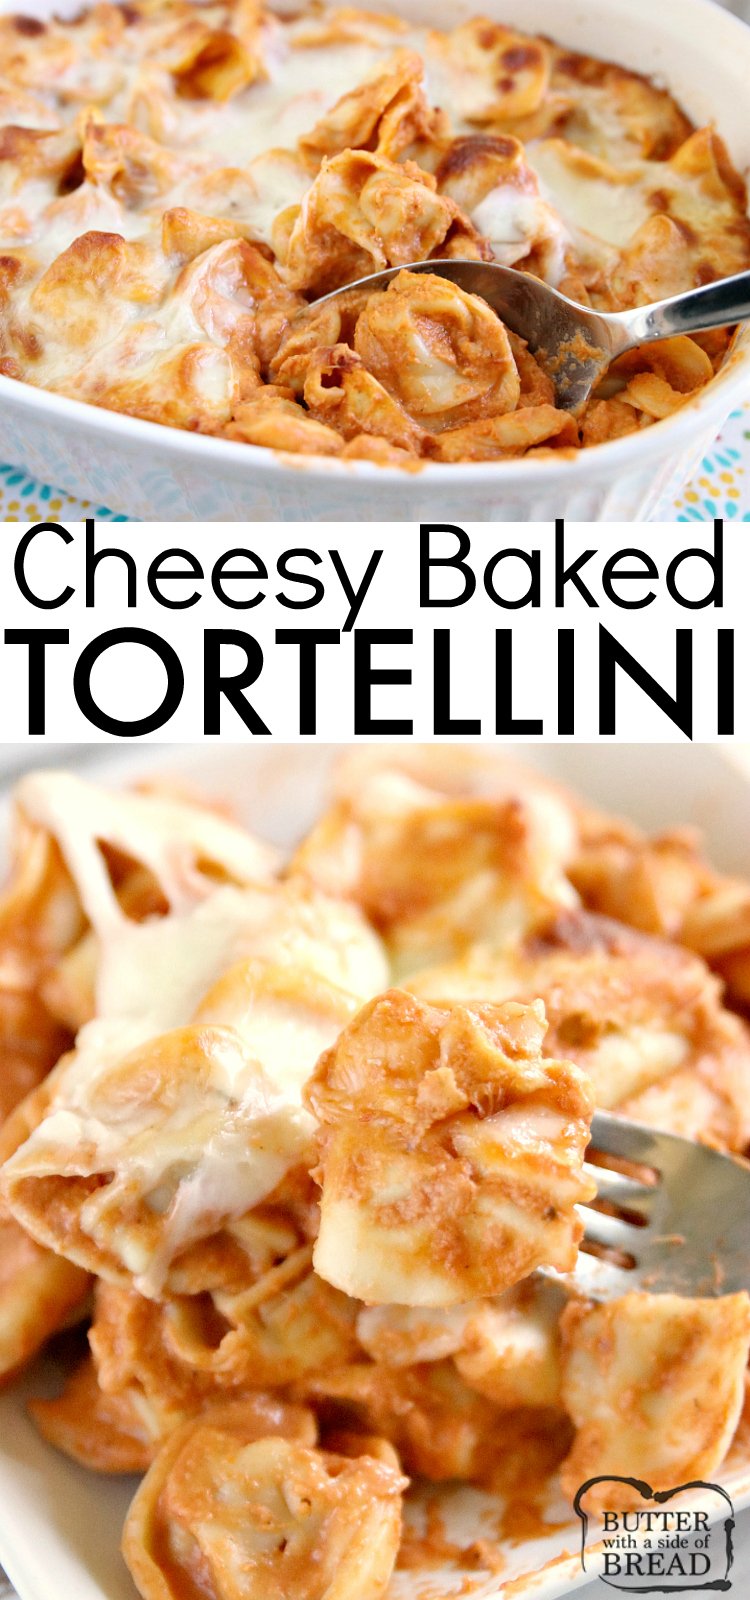 Cheesy Baked Tortellini is made with cream cheese, a jar of spaghetti sauce, cheese tortellini and mozzarella cheese. Only four ingredients in this easy pasta dish that is delicious!